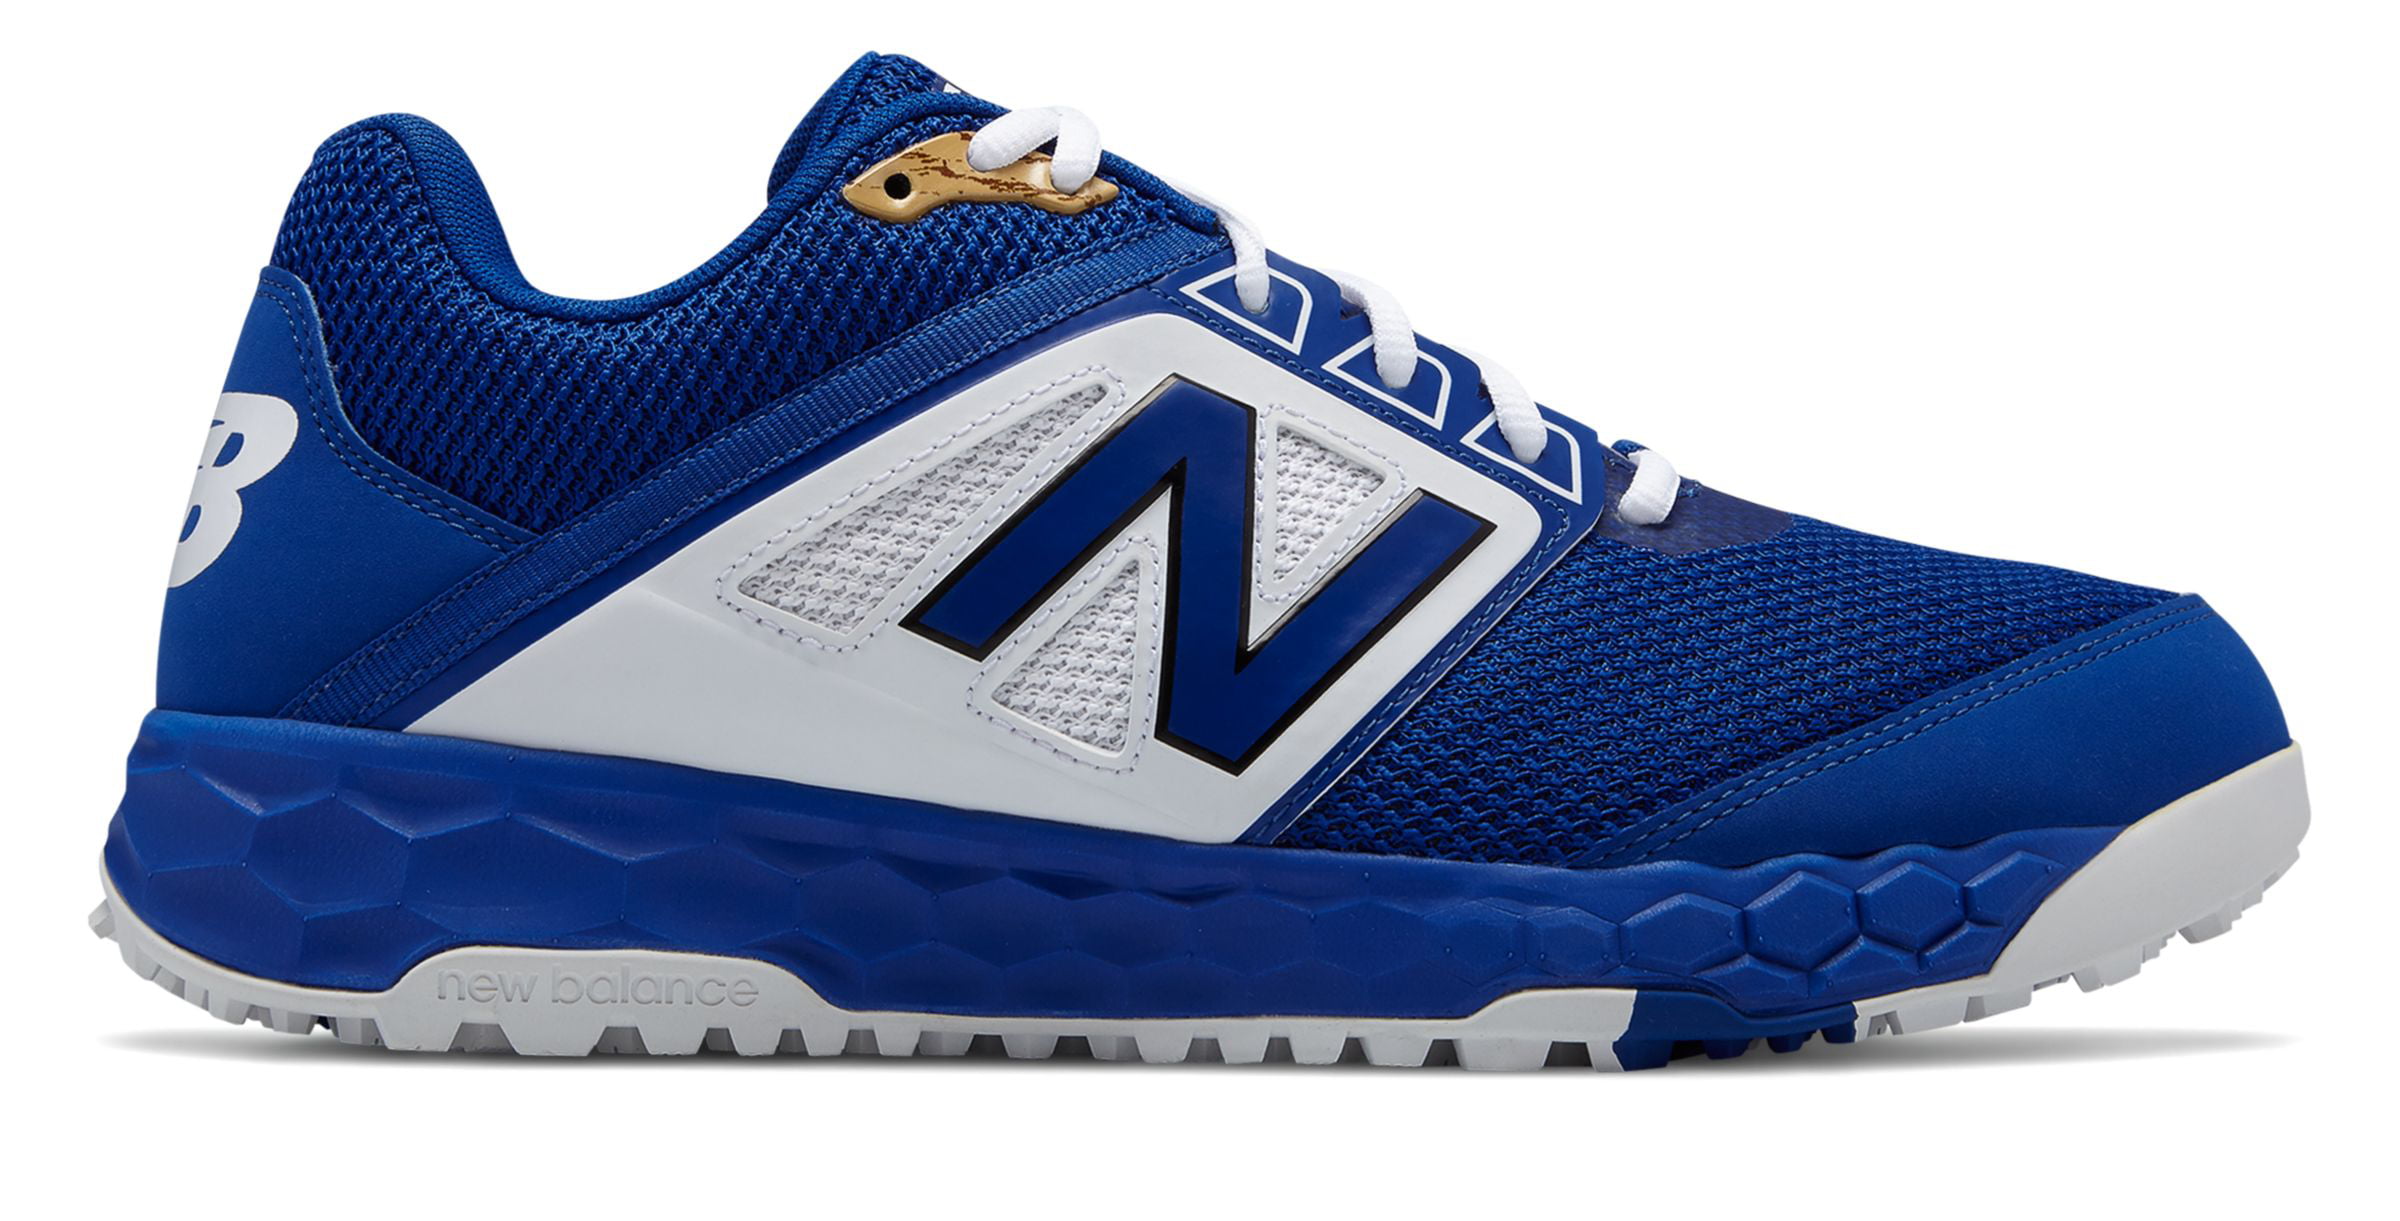 New Balance Low-Cut 3000v4 Turf Baseball Mens Shoes Blue with White ...